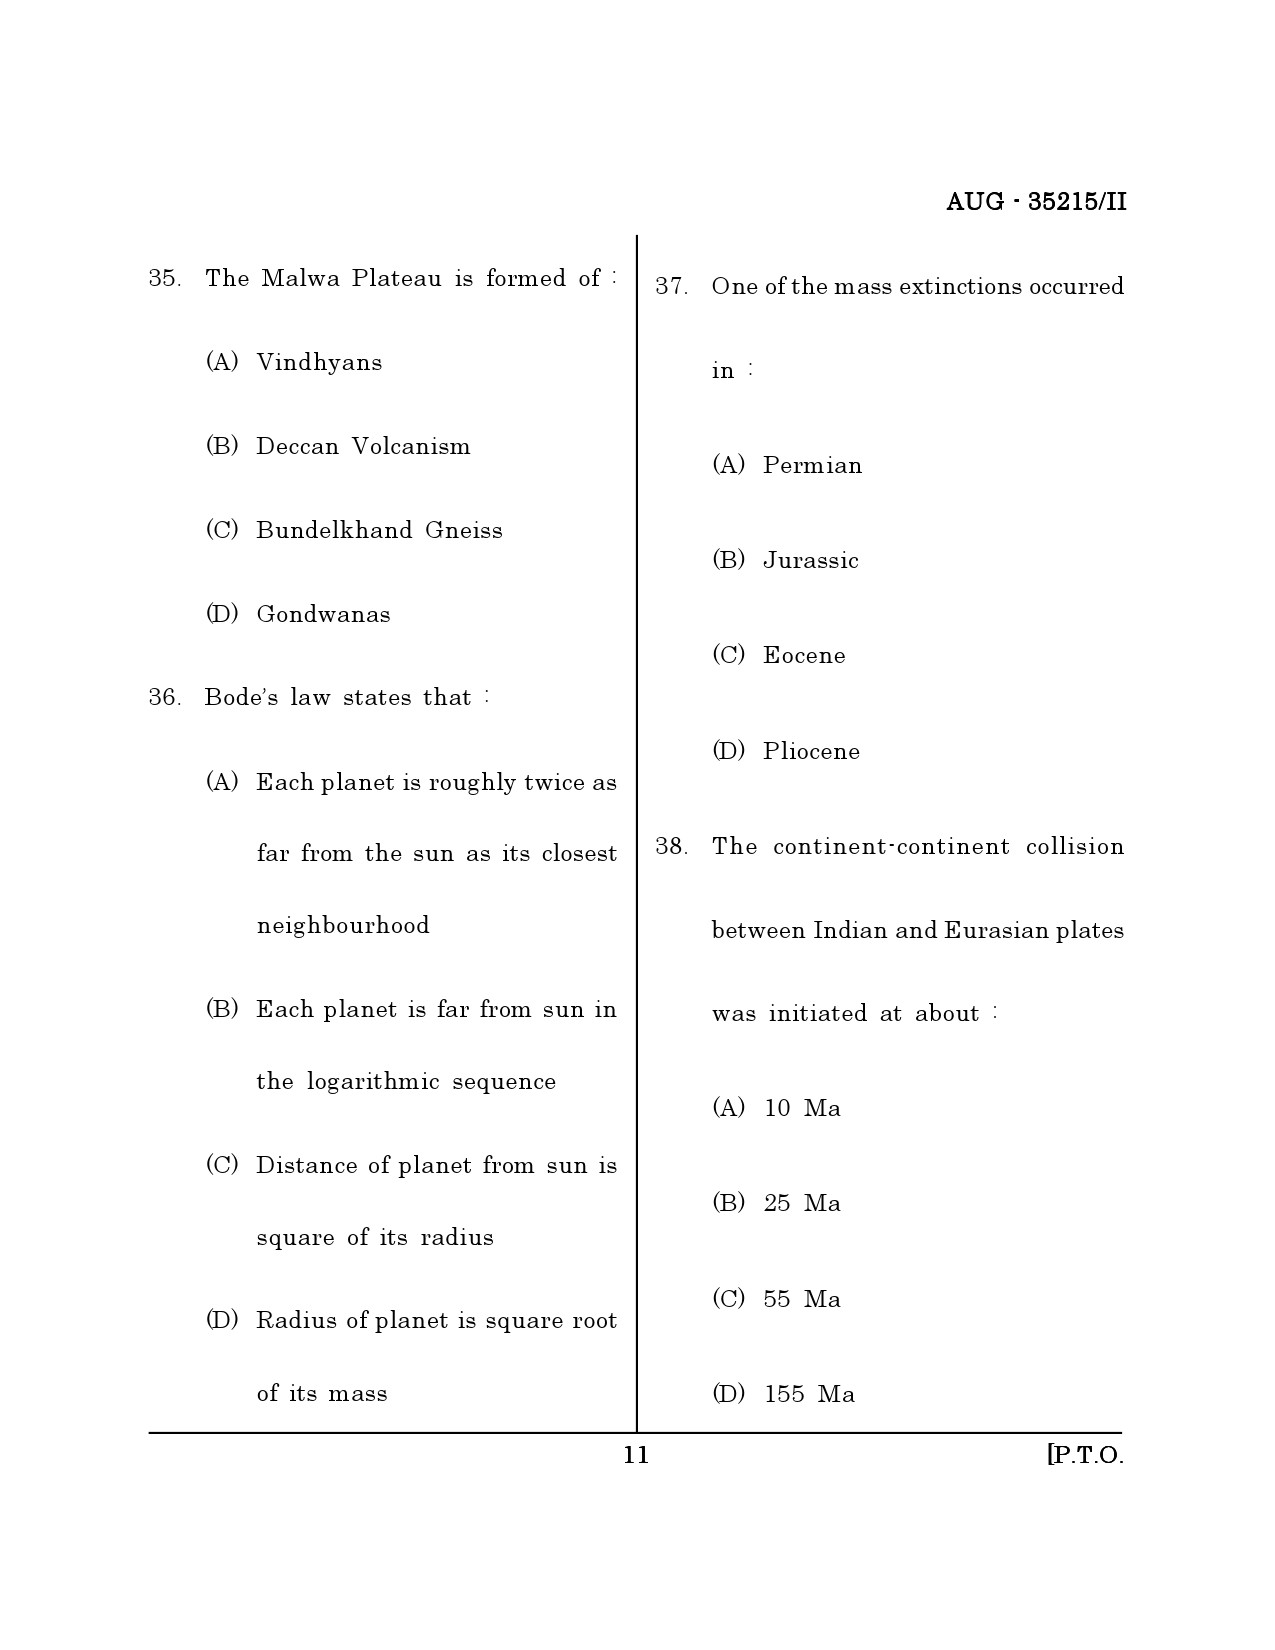 Maharashtra SET Earth Atmospheric Ocean Planetary Science Question Paper II August 2015 10